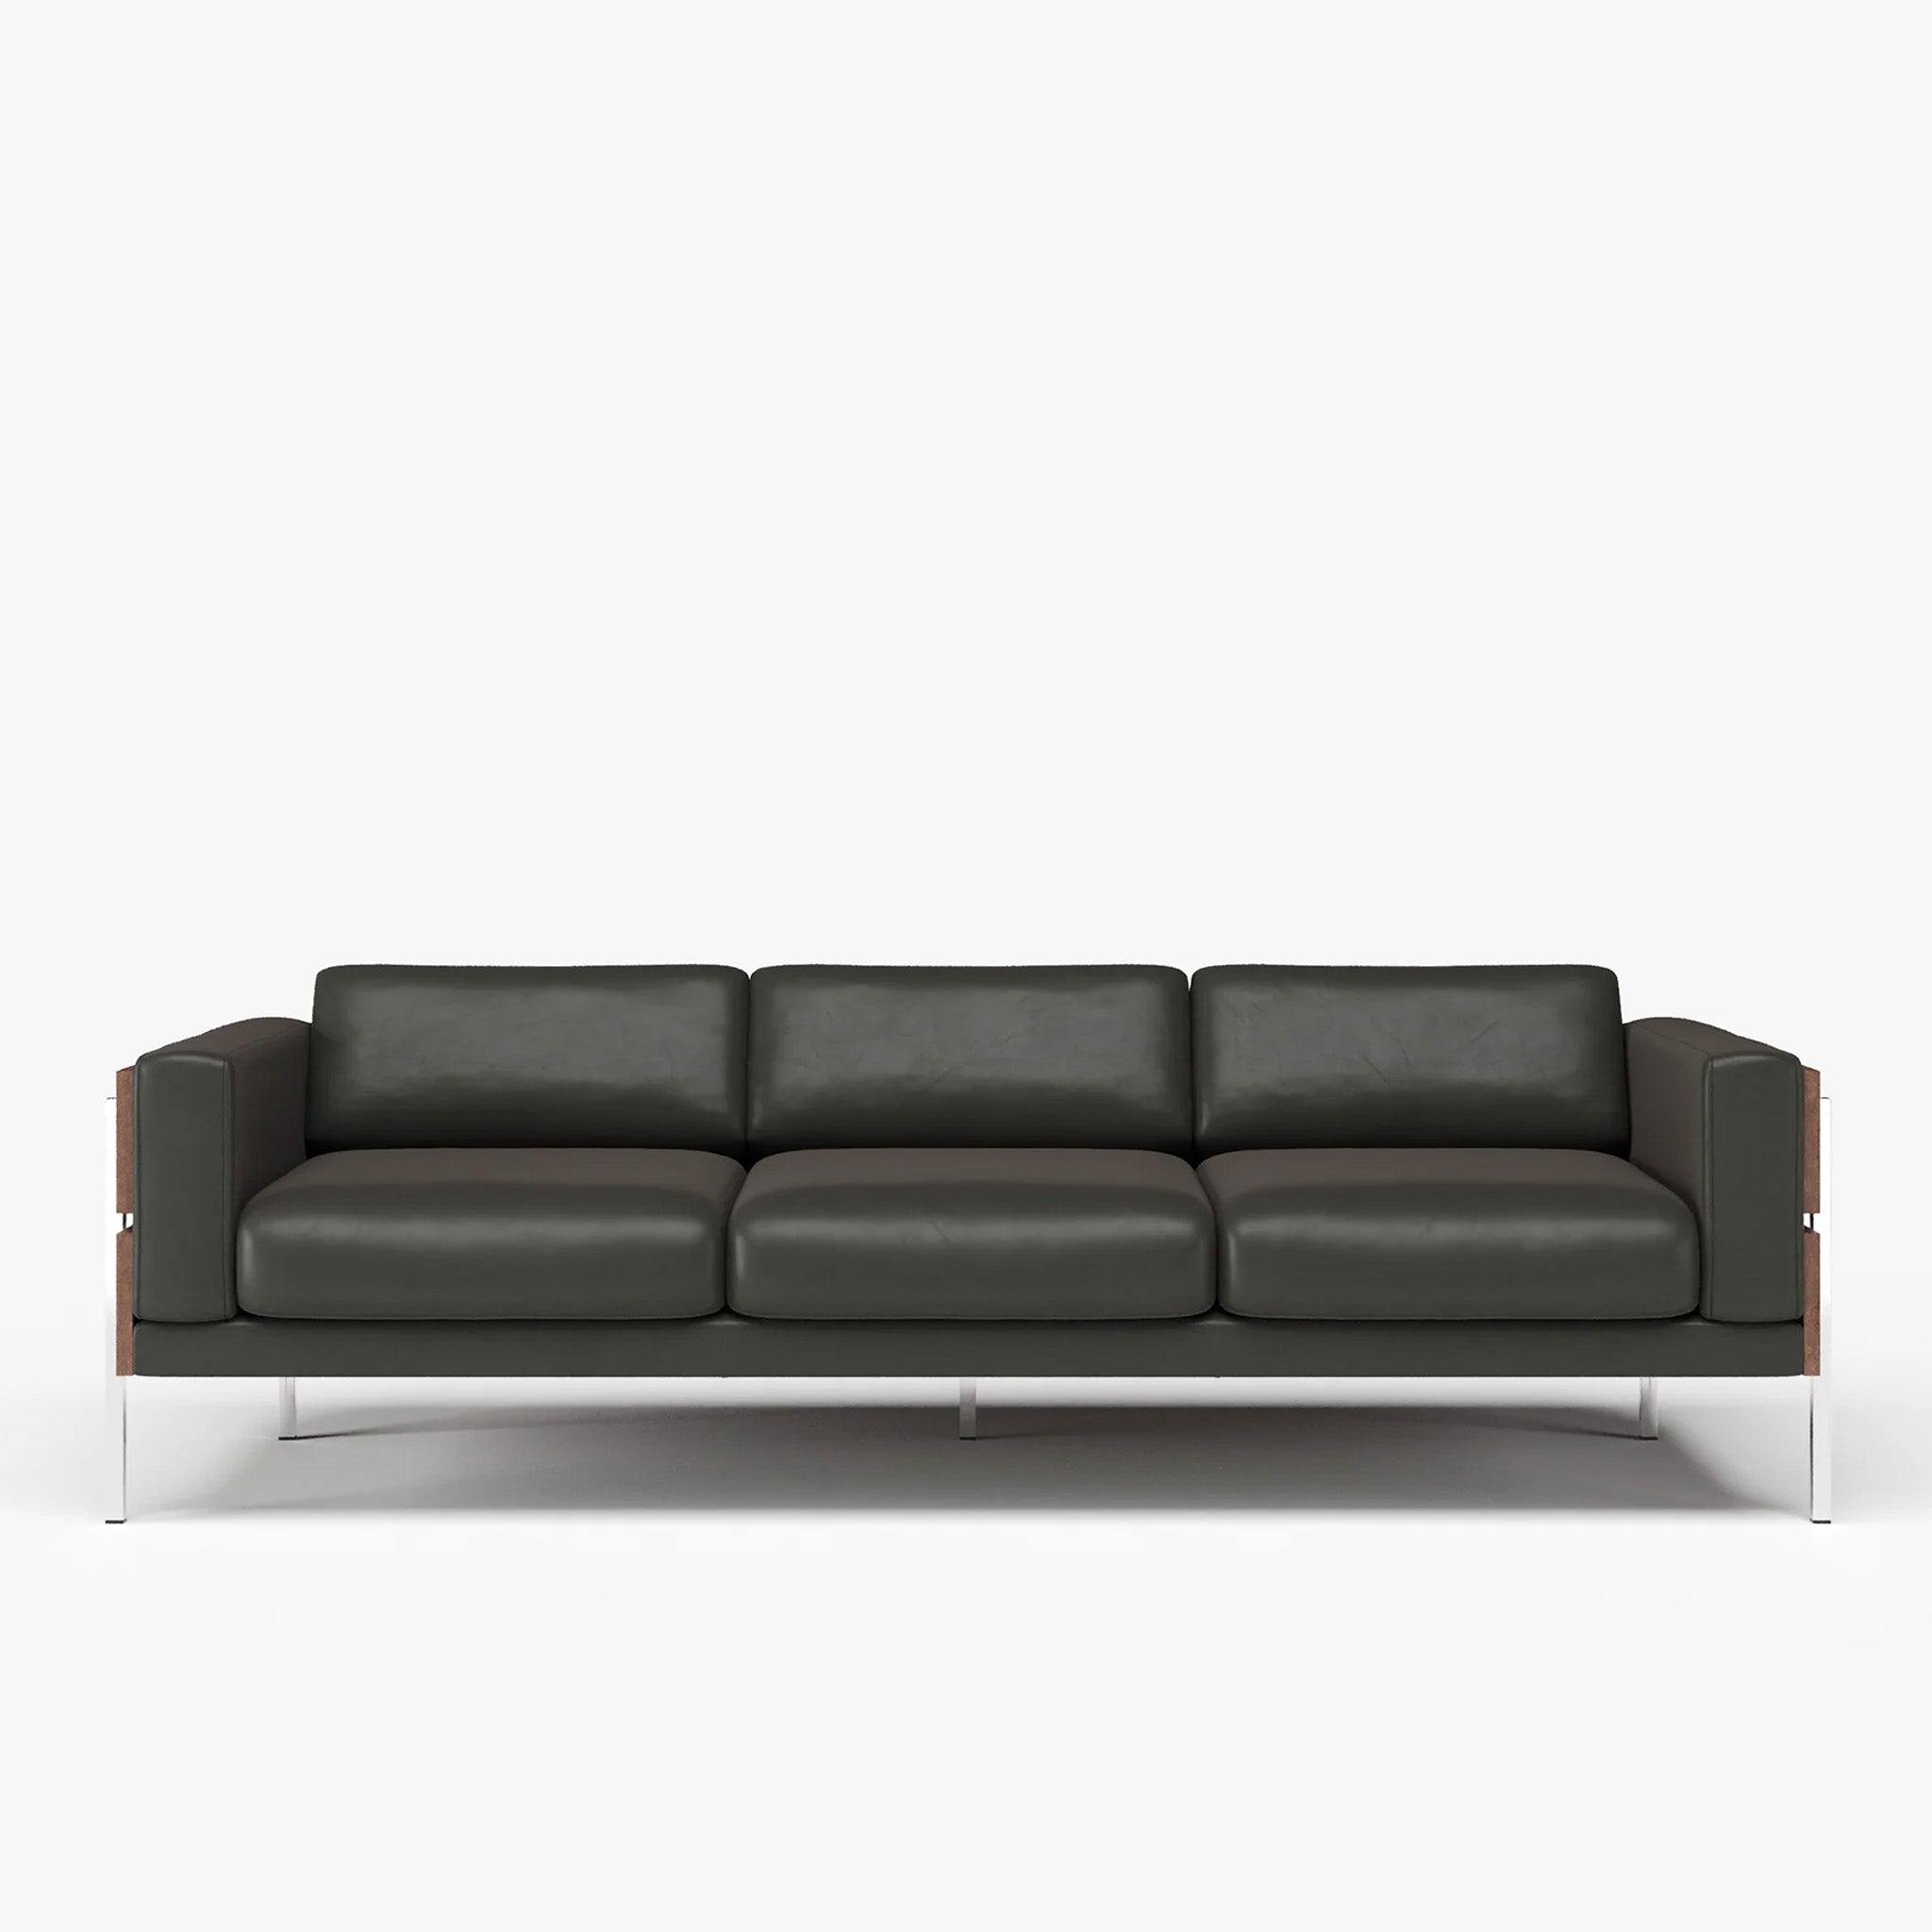 Forum 3 Seat Sofa by Robin Day for Case